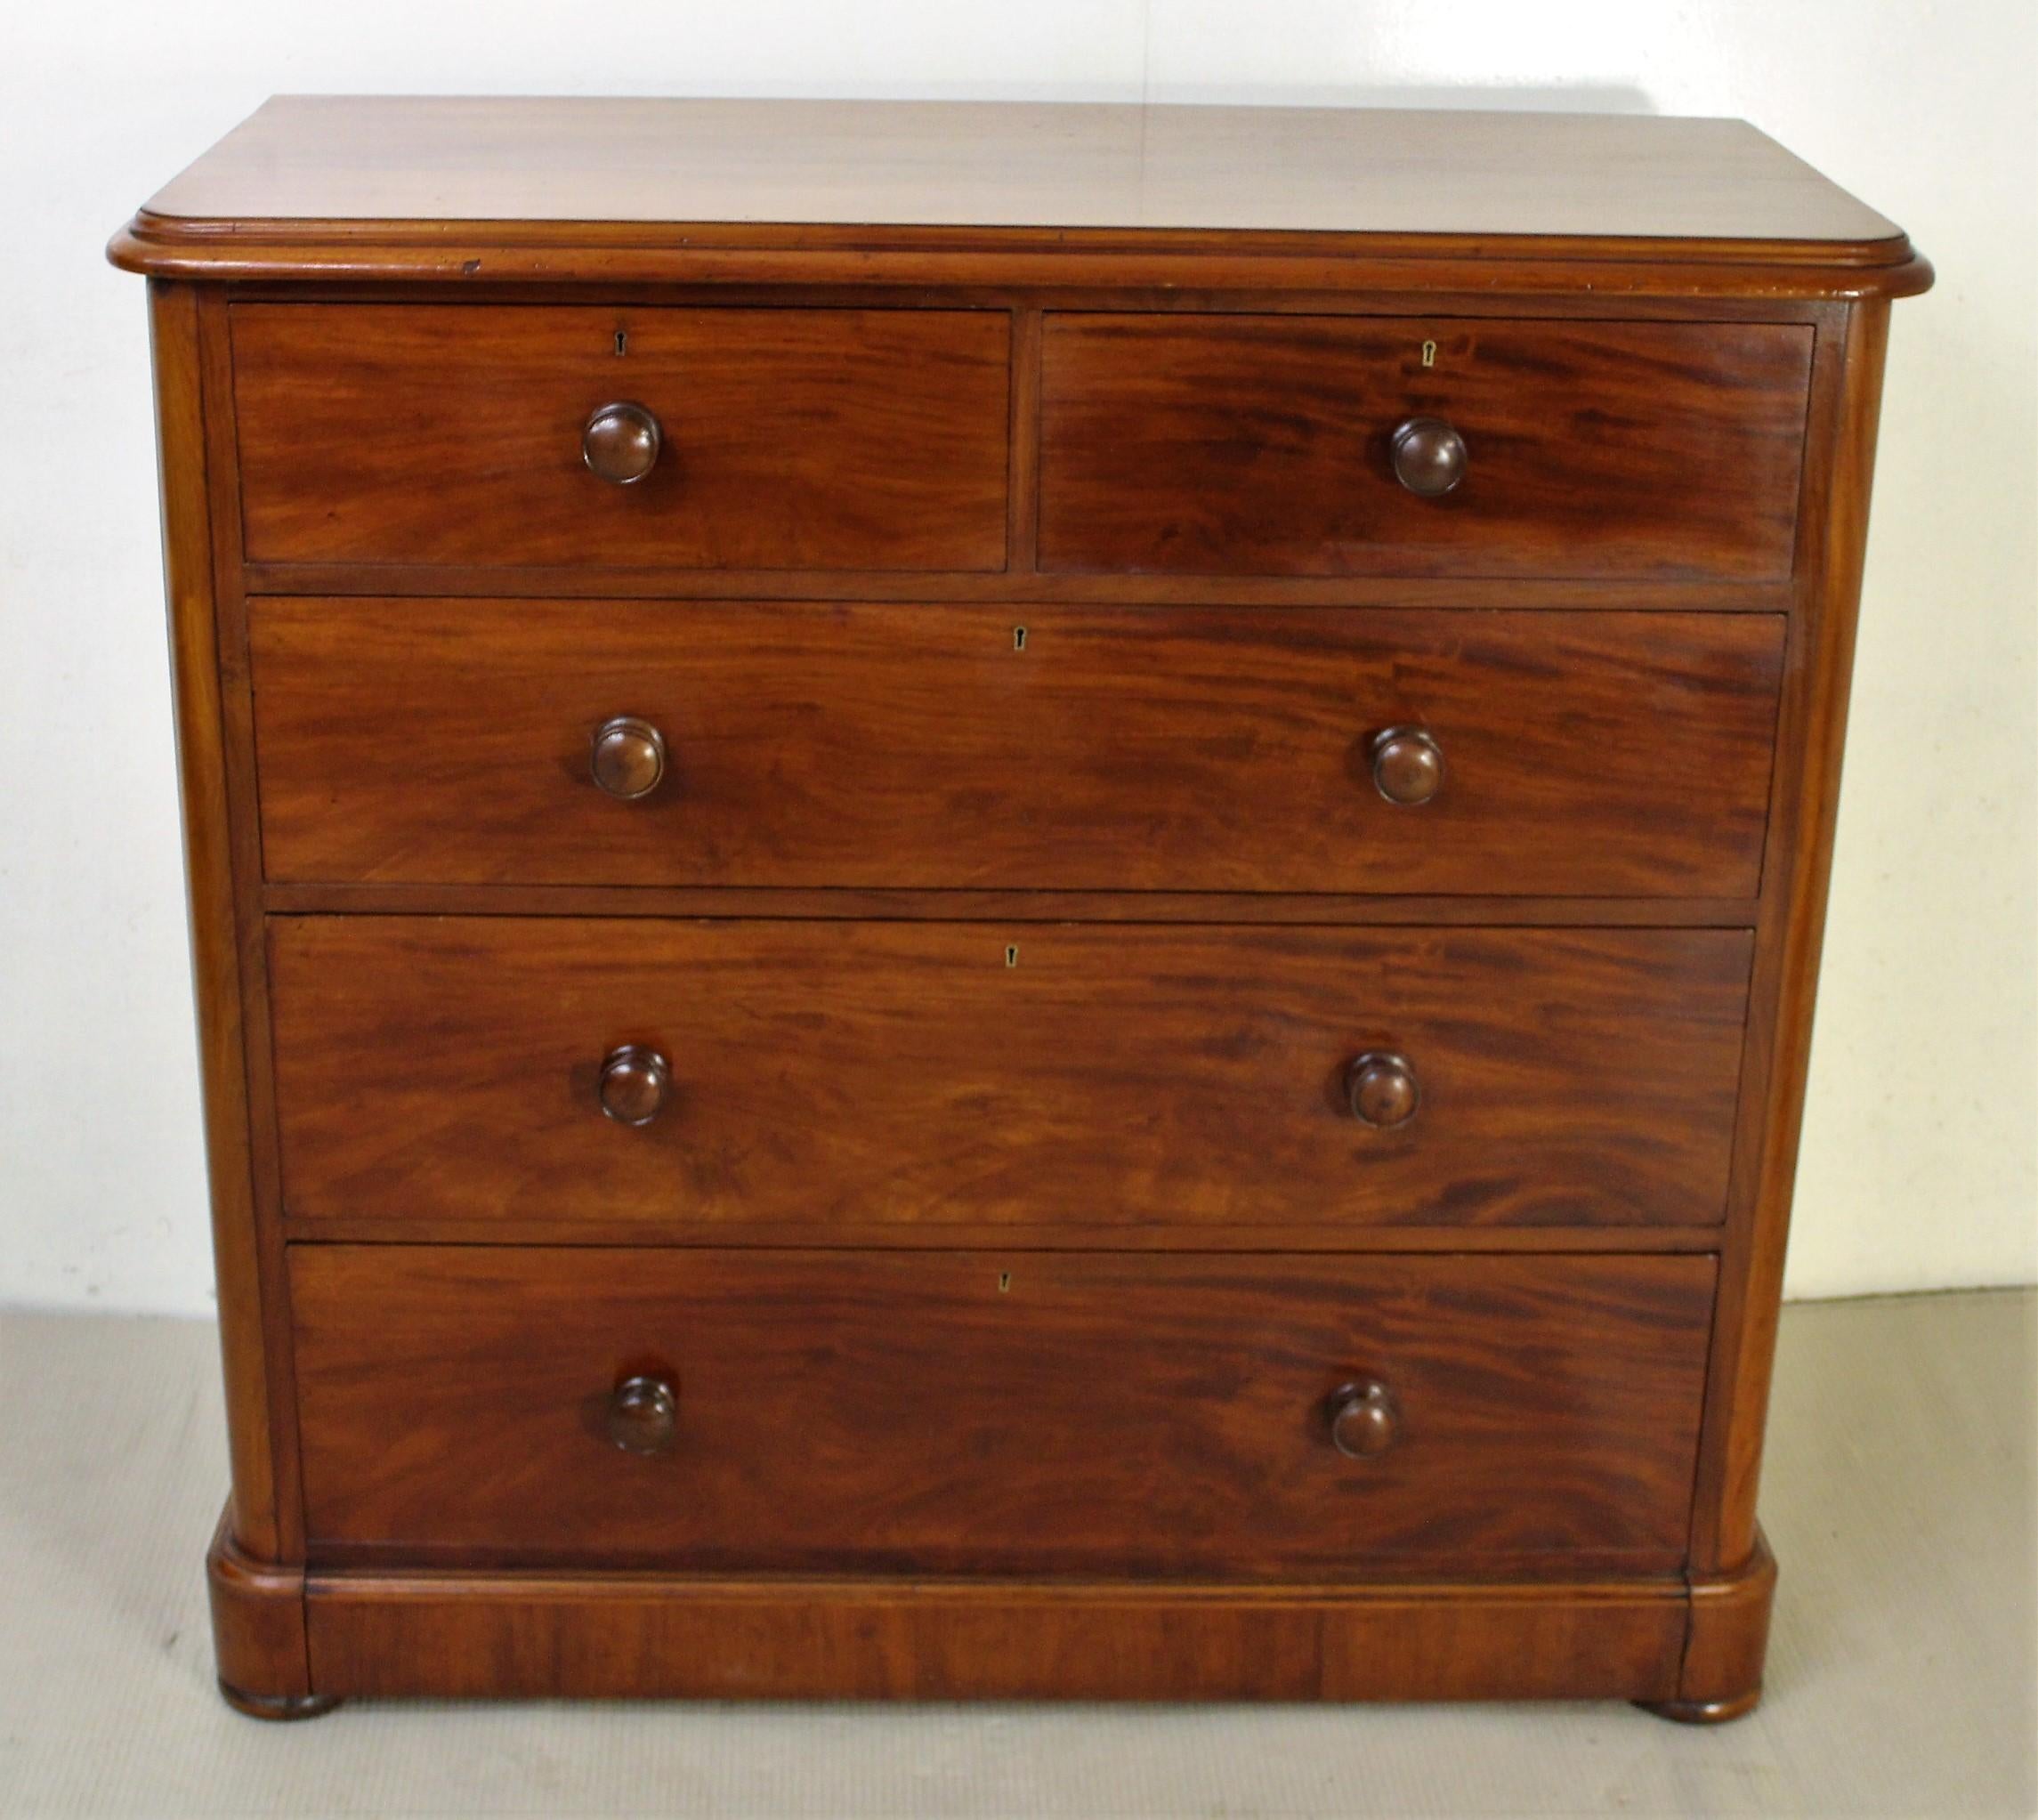 A splendid mid-Victorian period mahogany chest of drawers. Of very good construction in solid mahogany with attractive mahogany veneers. With an arrangement of 2 short over 3 long drawers which afford generous storage capacity. Sympathetically